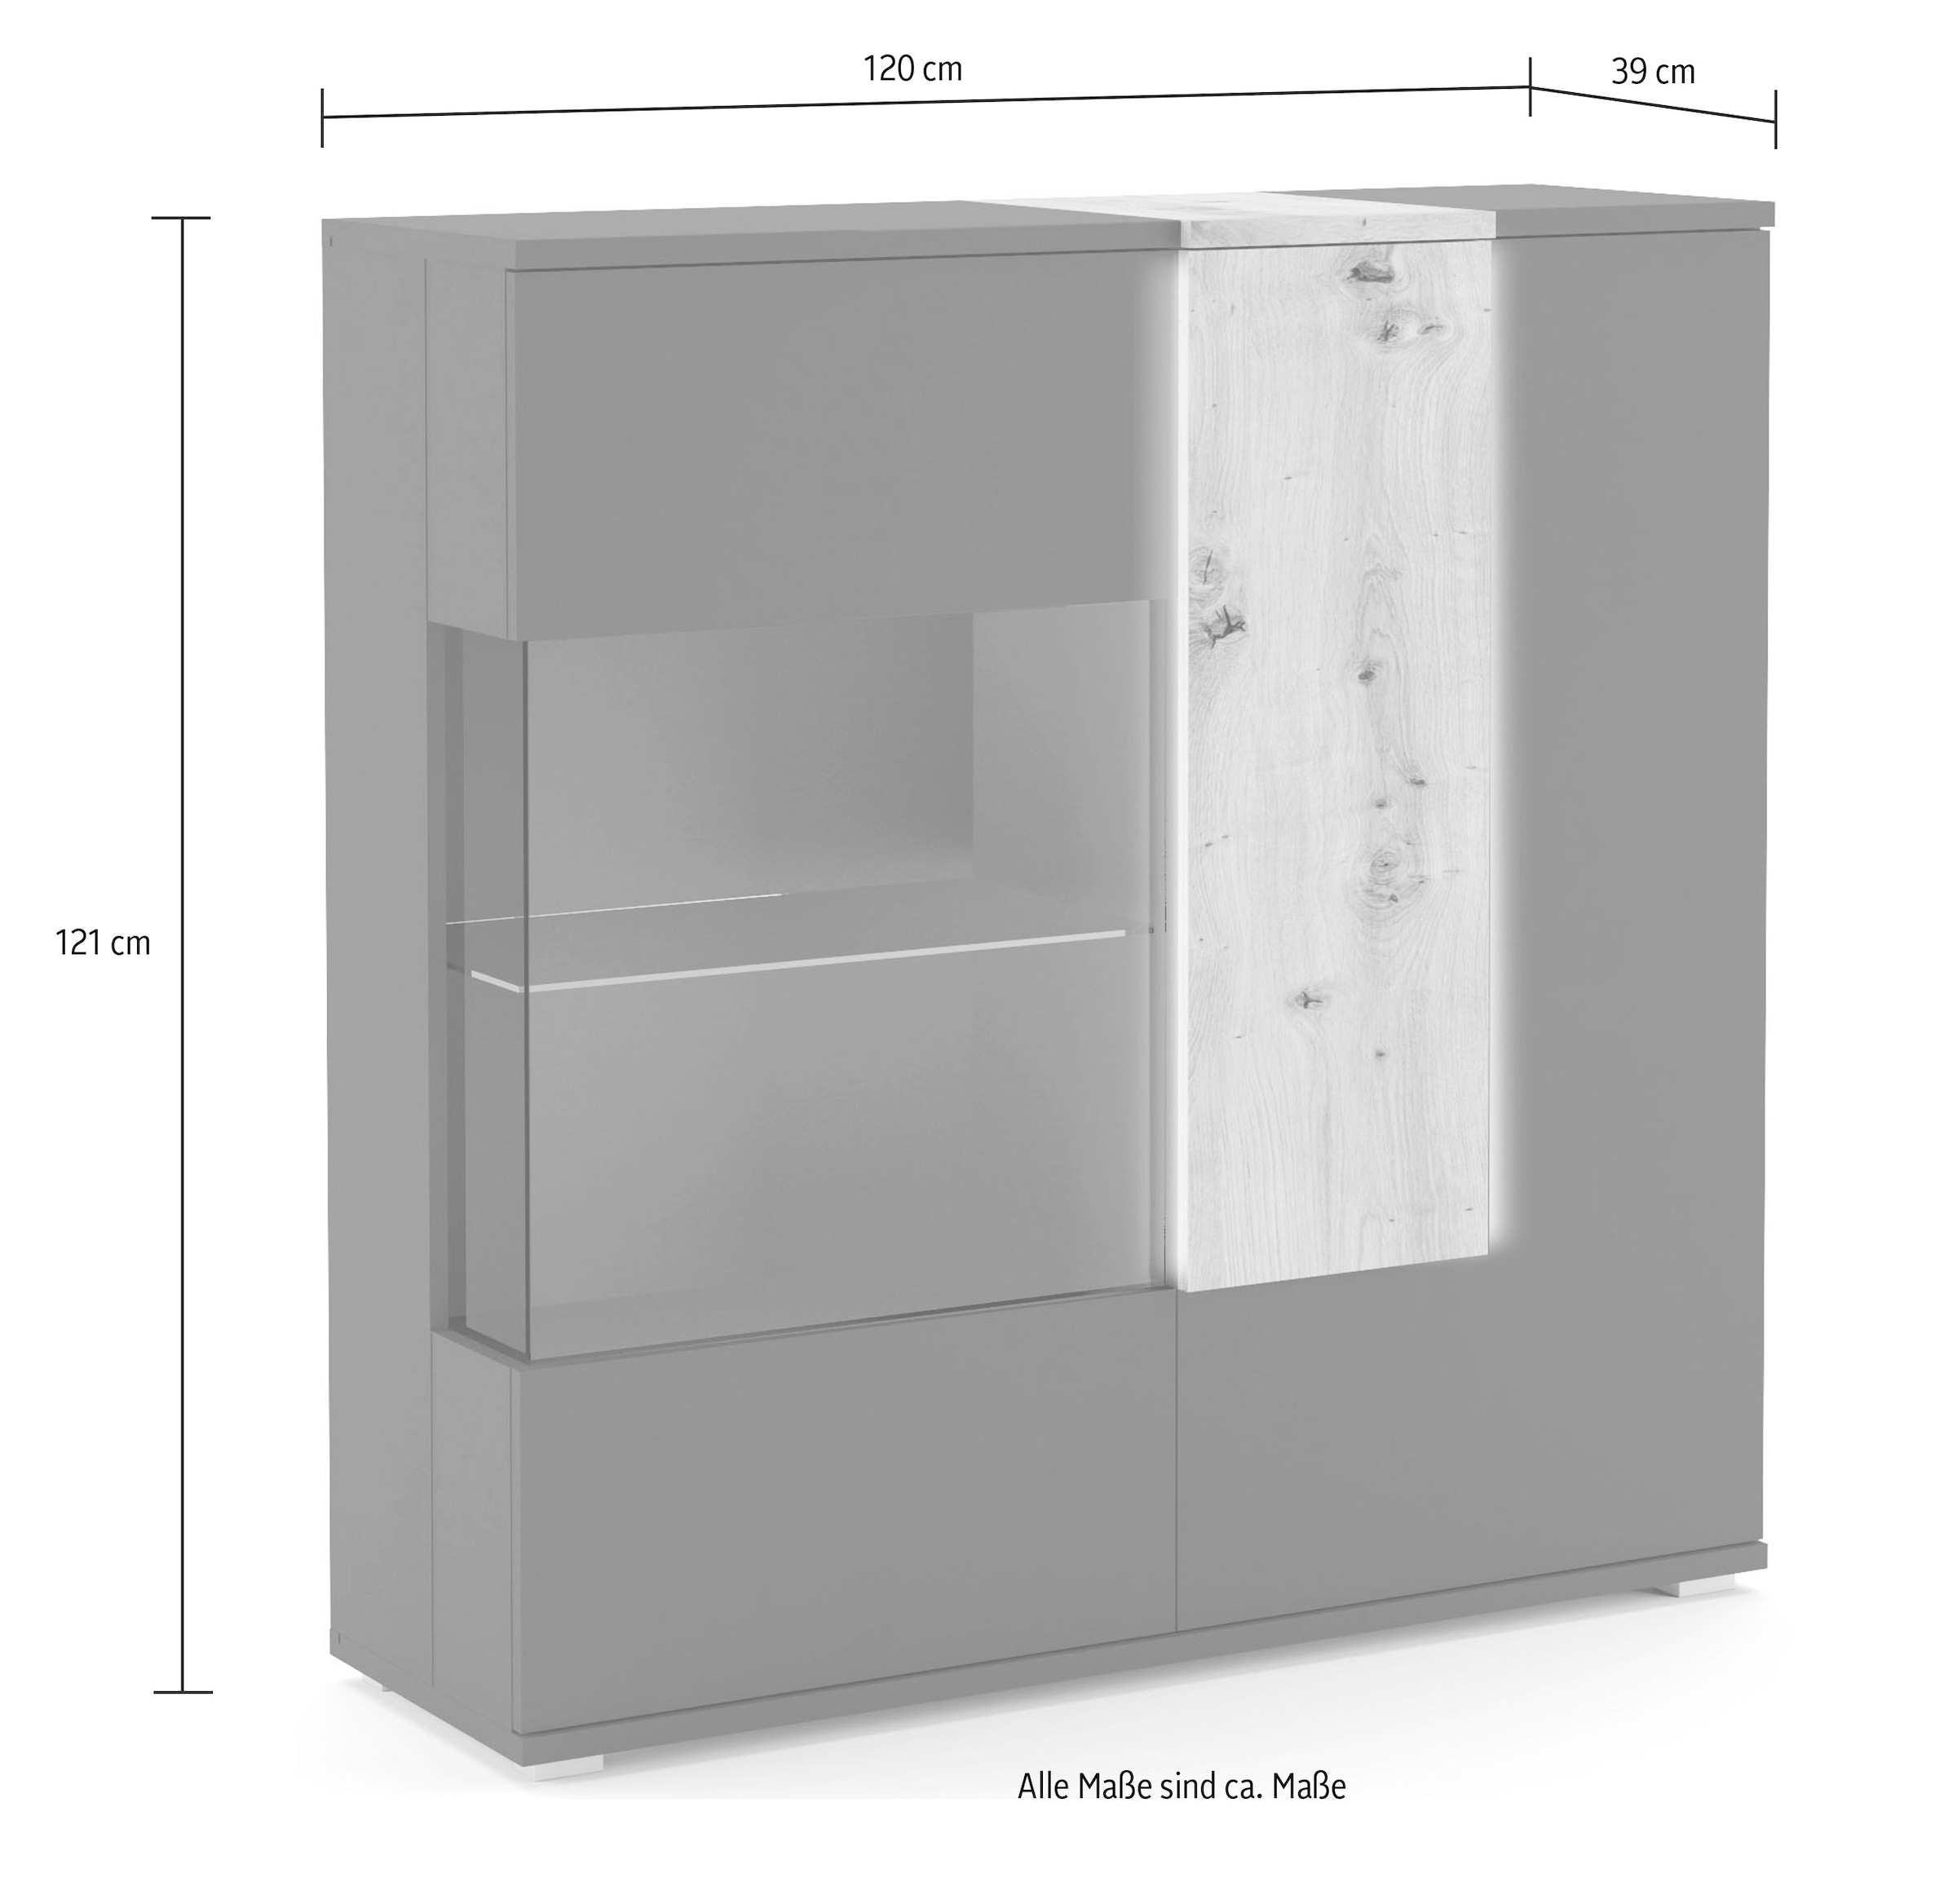 COTTA Highboard »Montana«, Breite 120 cm, inkl. LED-Beleuchtung und Push-To-Open